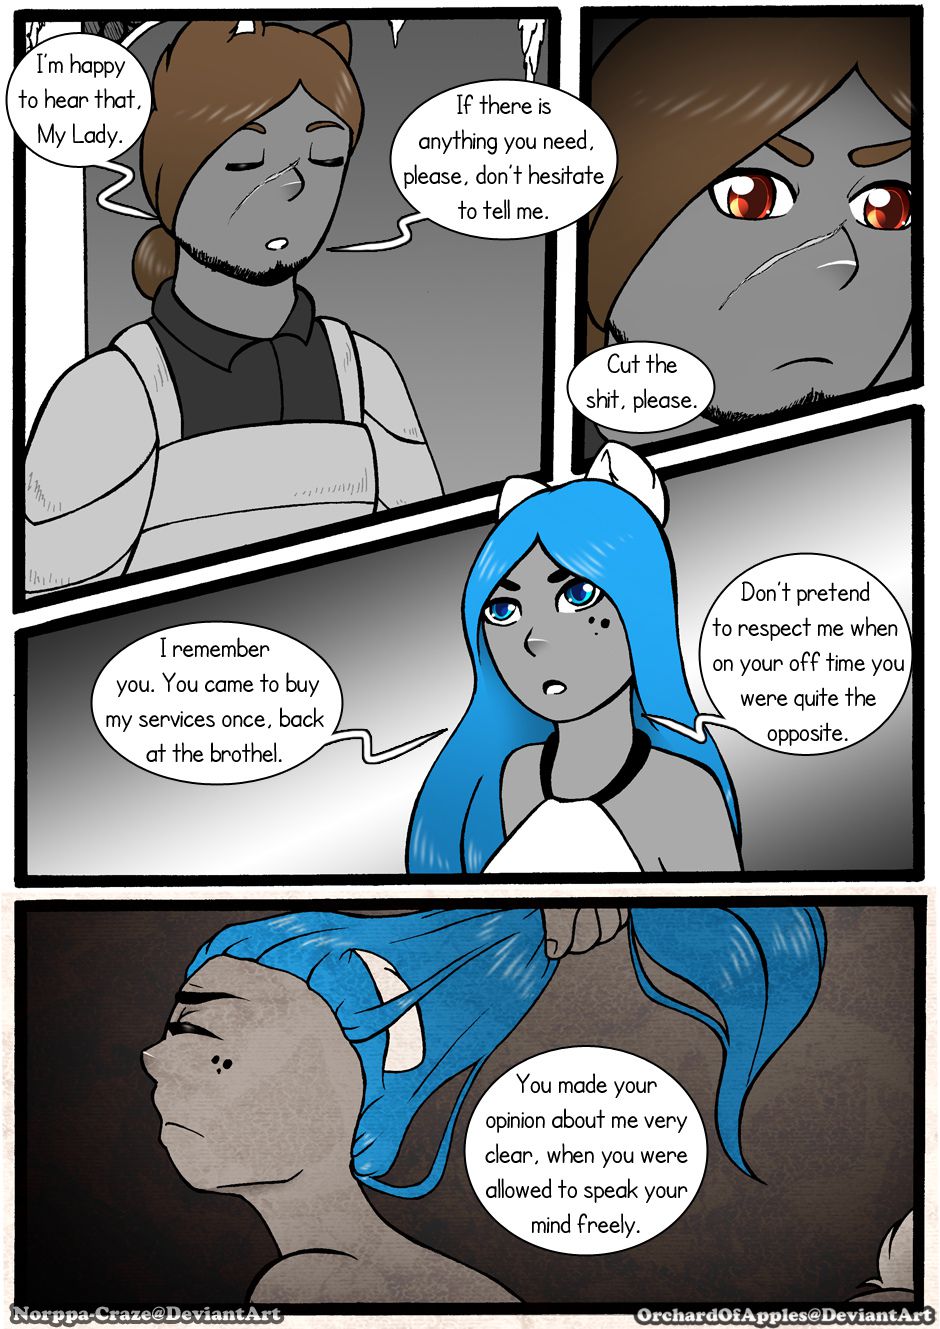 [Jeny-jen94] Between Kings and Queens [Ongoing] 249